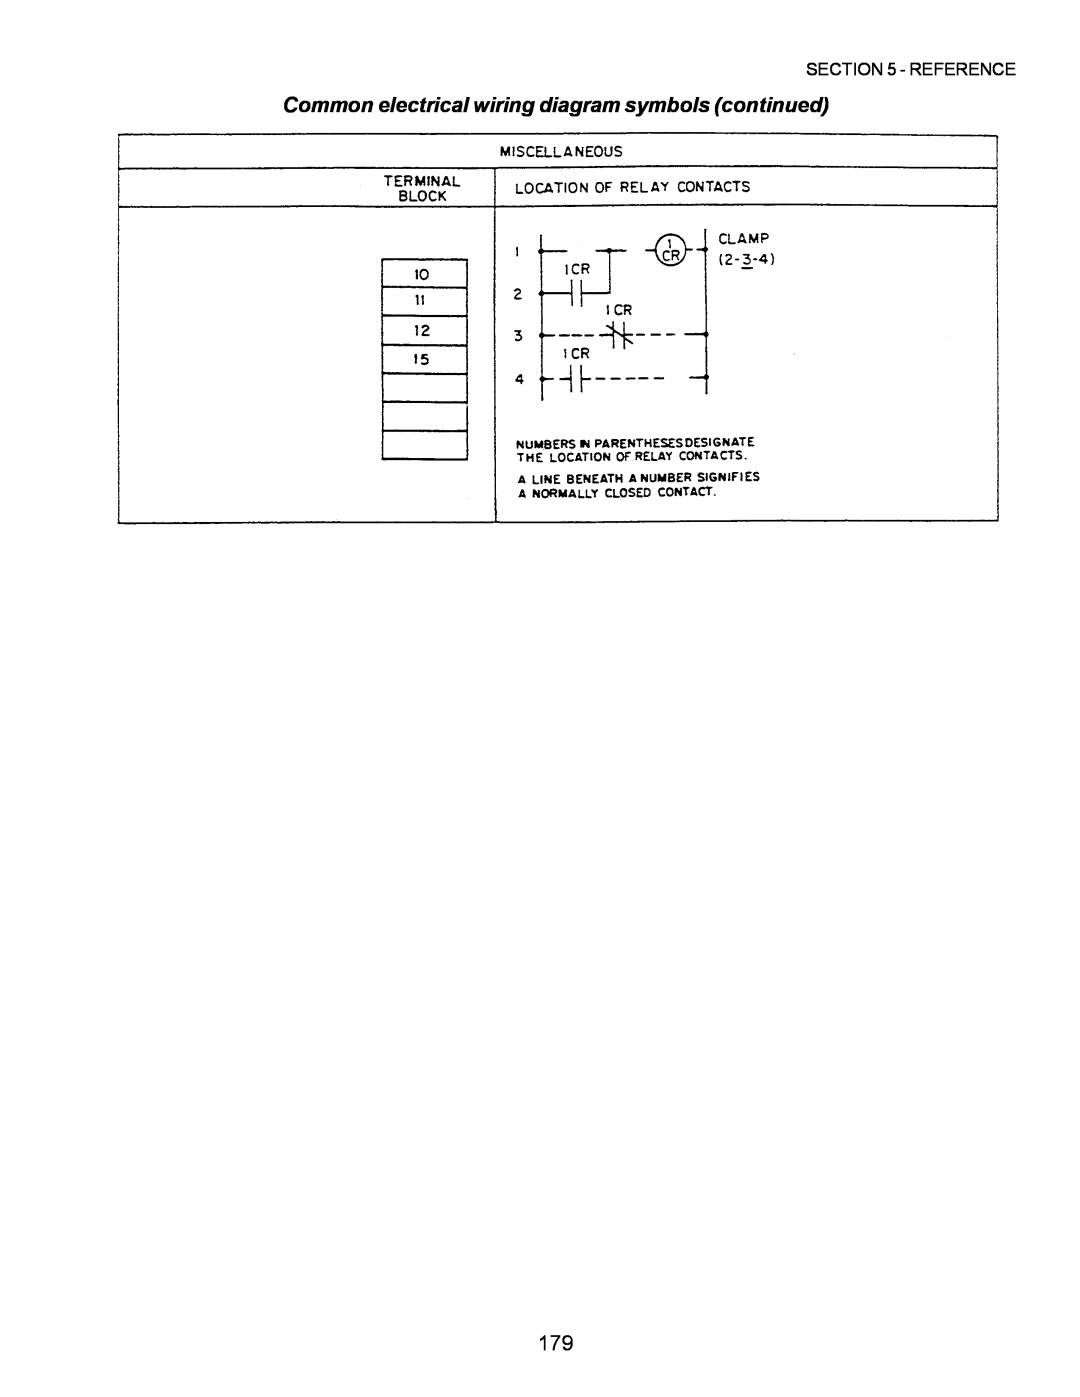 Middleby Marshall PS570, PS360, PS200, PS555, PS220, PS224 PS310 Common electrical wiring diagram symbols continued, Reference 